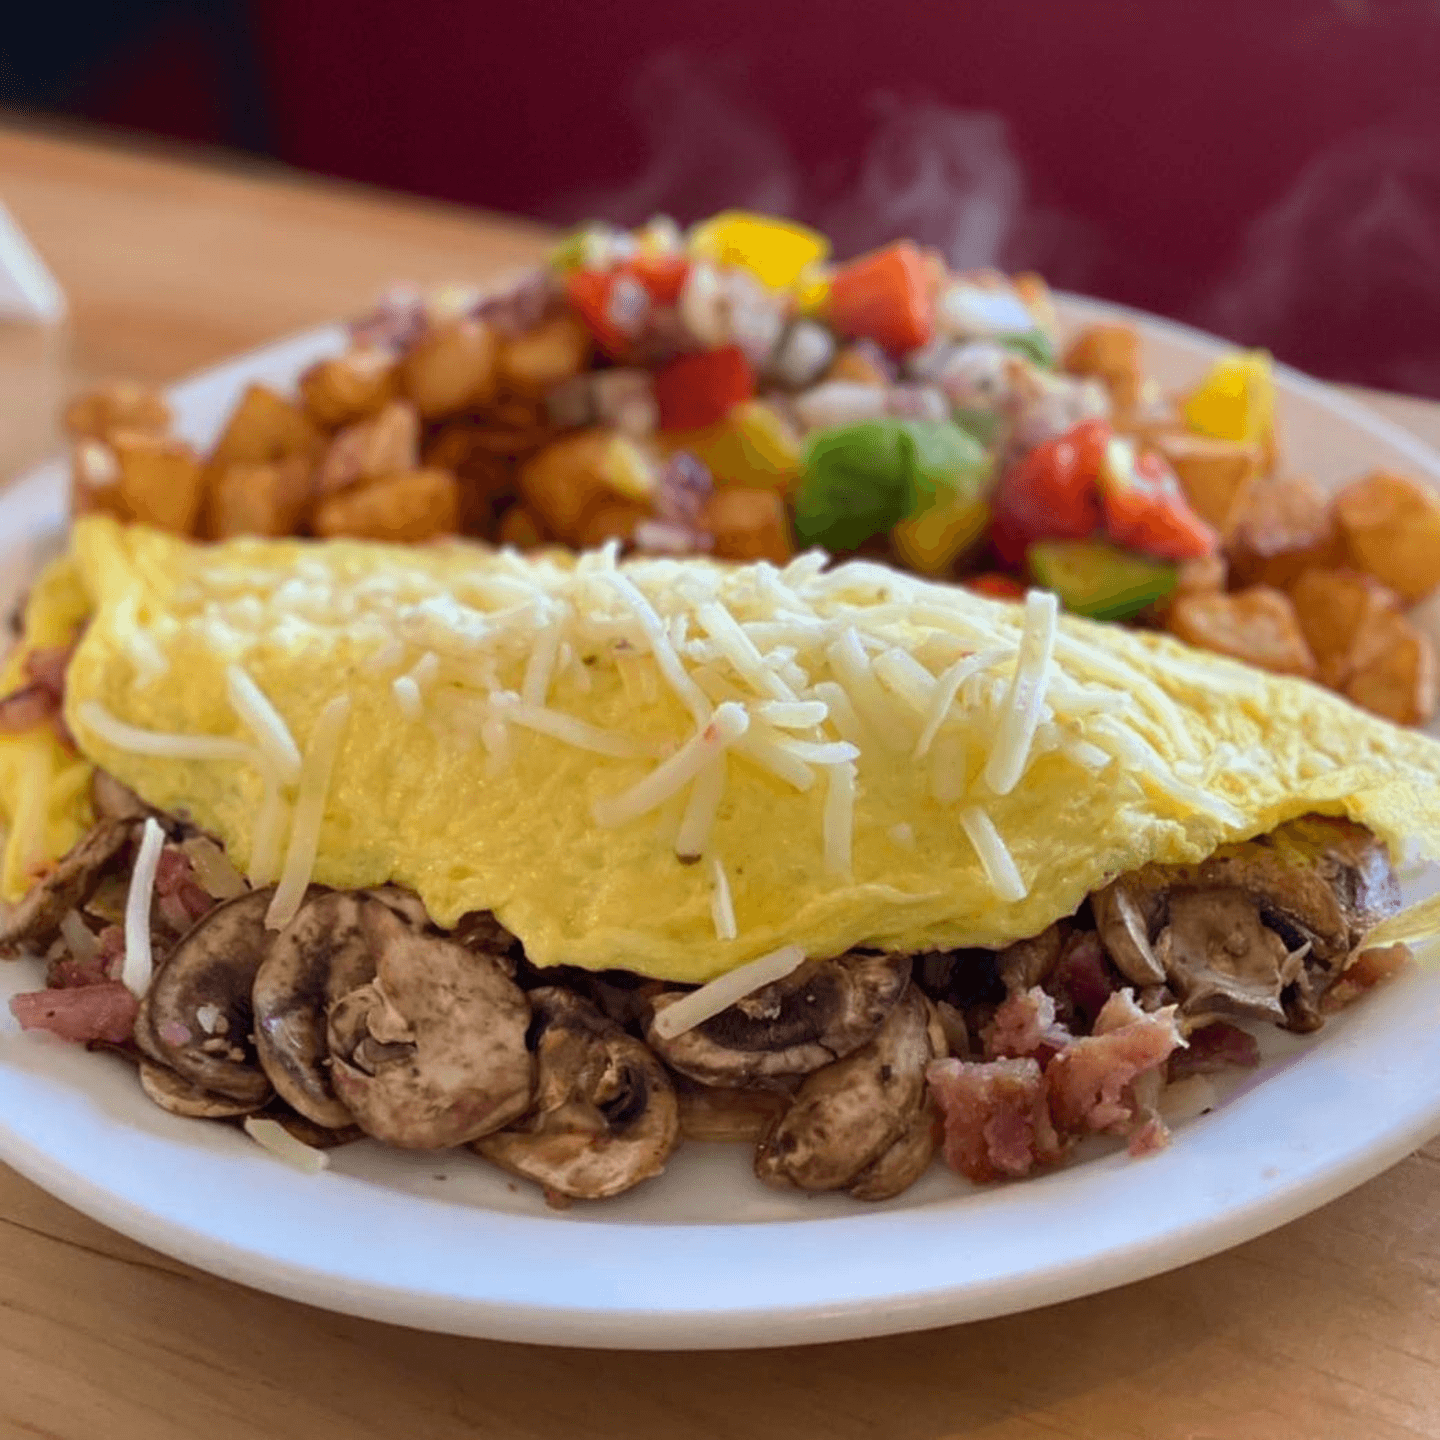 The Ultimate Bacon and Mushroom Omelet! 🍄🥓